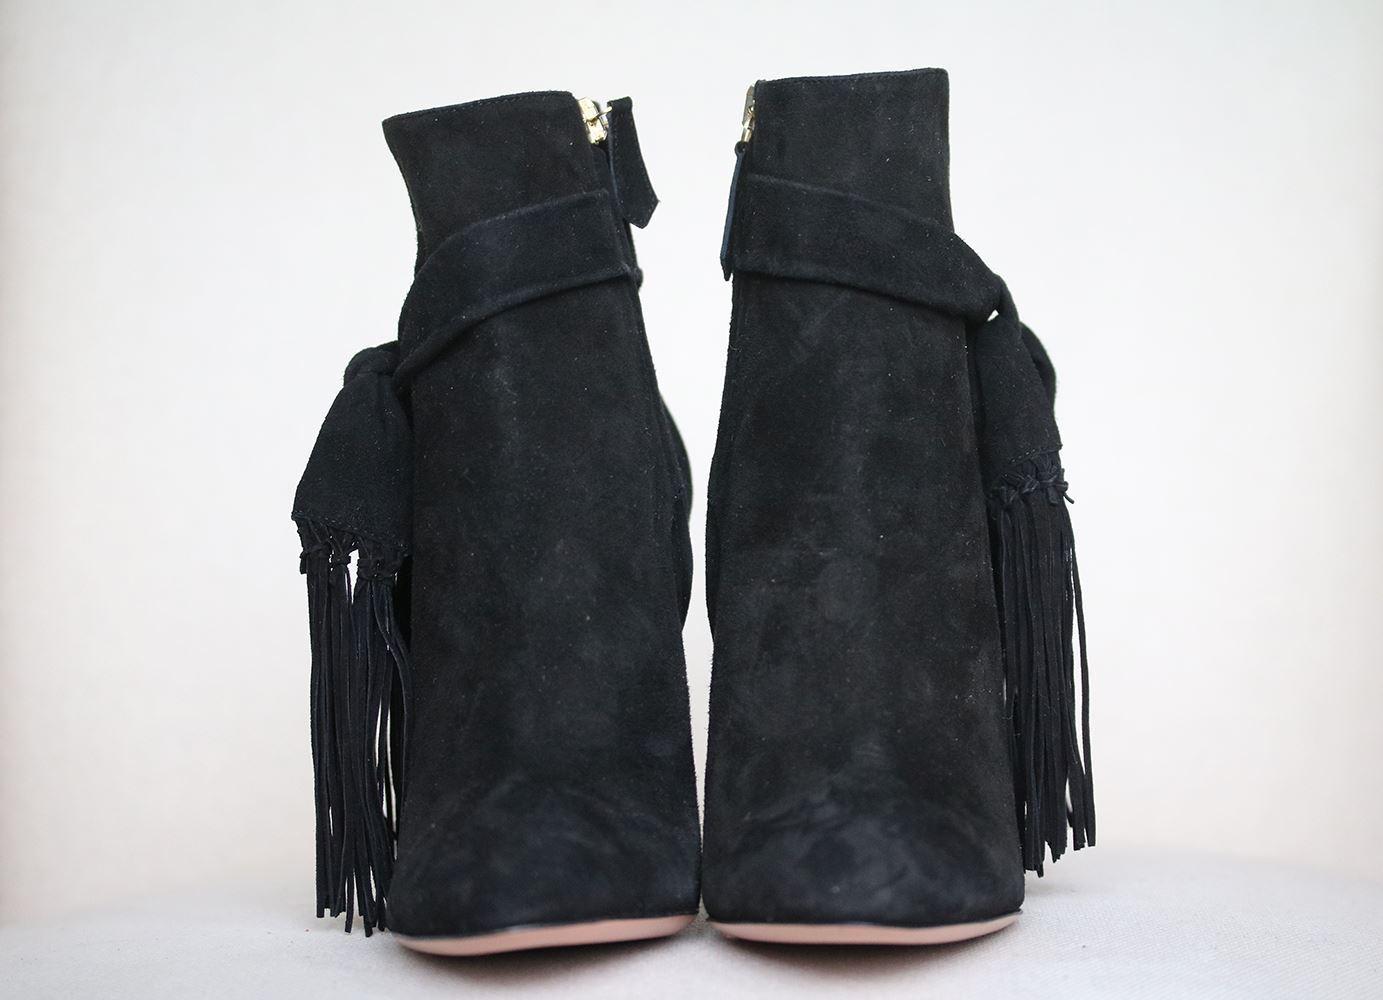 Suede bootie with wrap around tassel straps. Suede upper. Heel measures approximately 105 mm/ 4 inches. Black suede. Made in Italy. Does not come with a box. 

Size: EU 37.5 (UK 4.5, US 7.5)

Condition: New without box. 